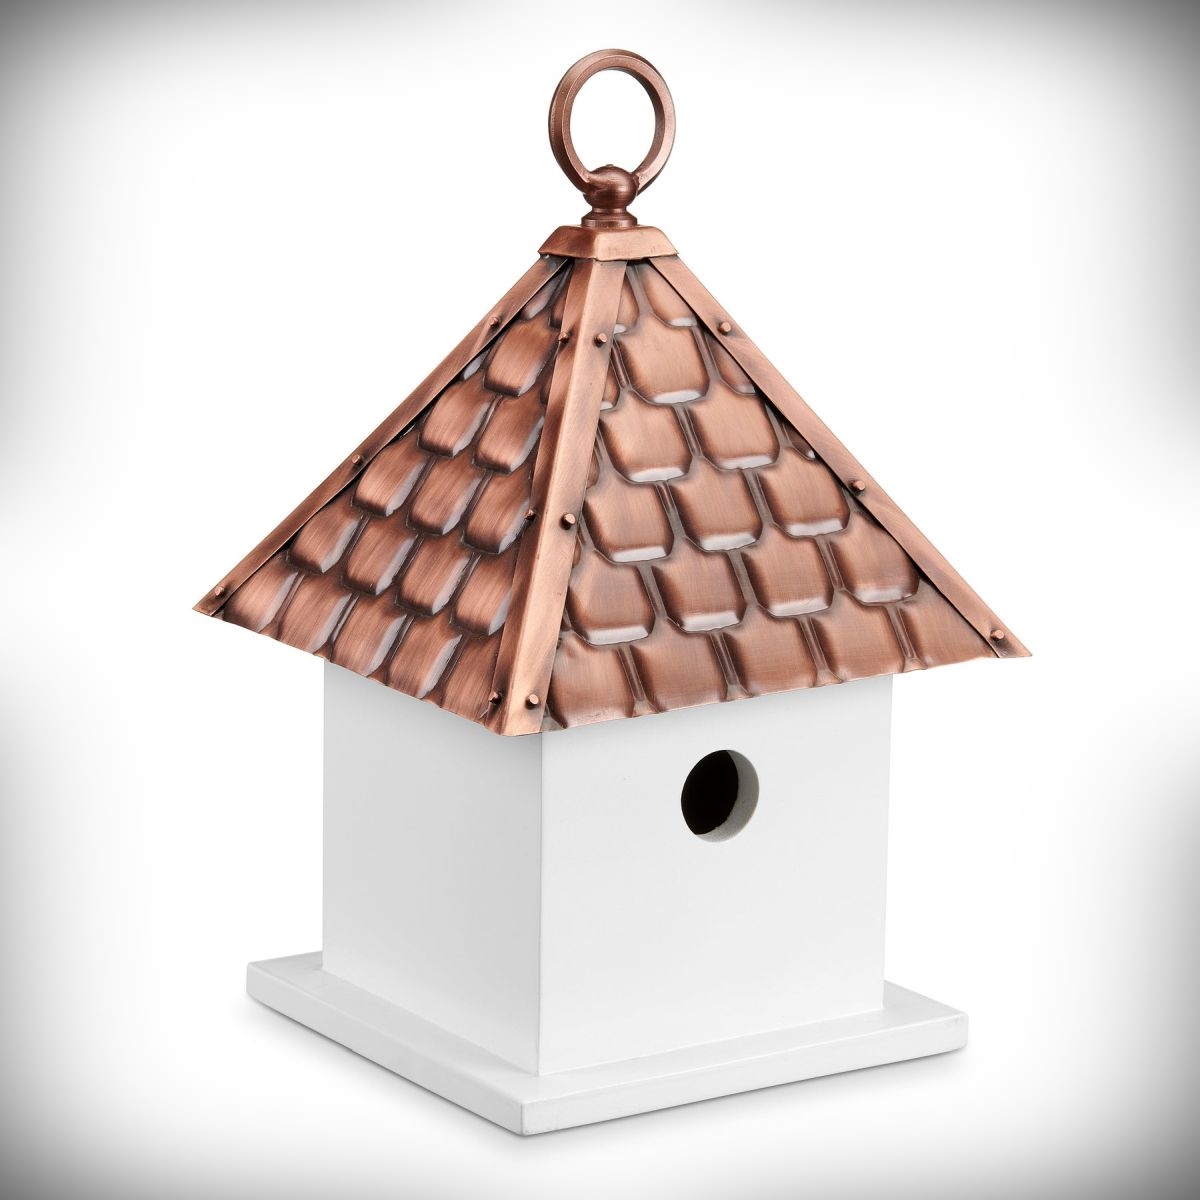 Bungalow Pure Copper Roof Bird House